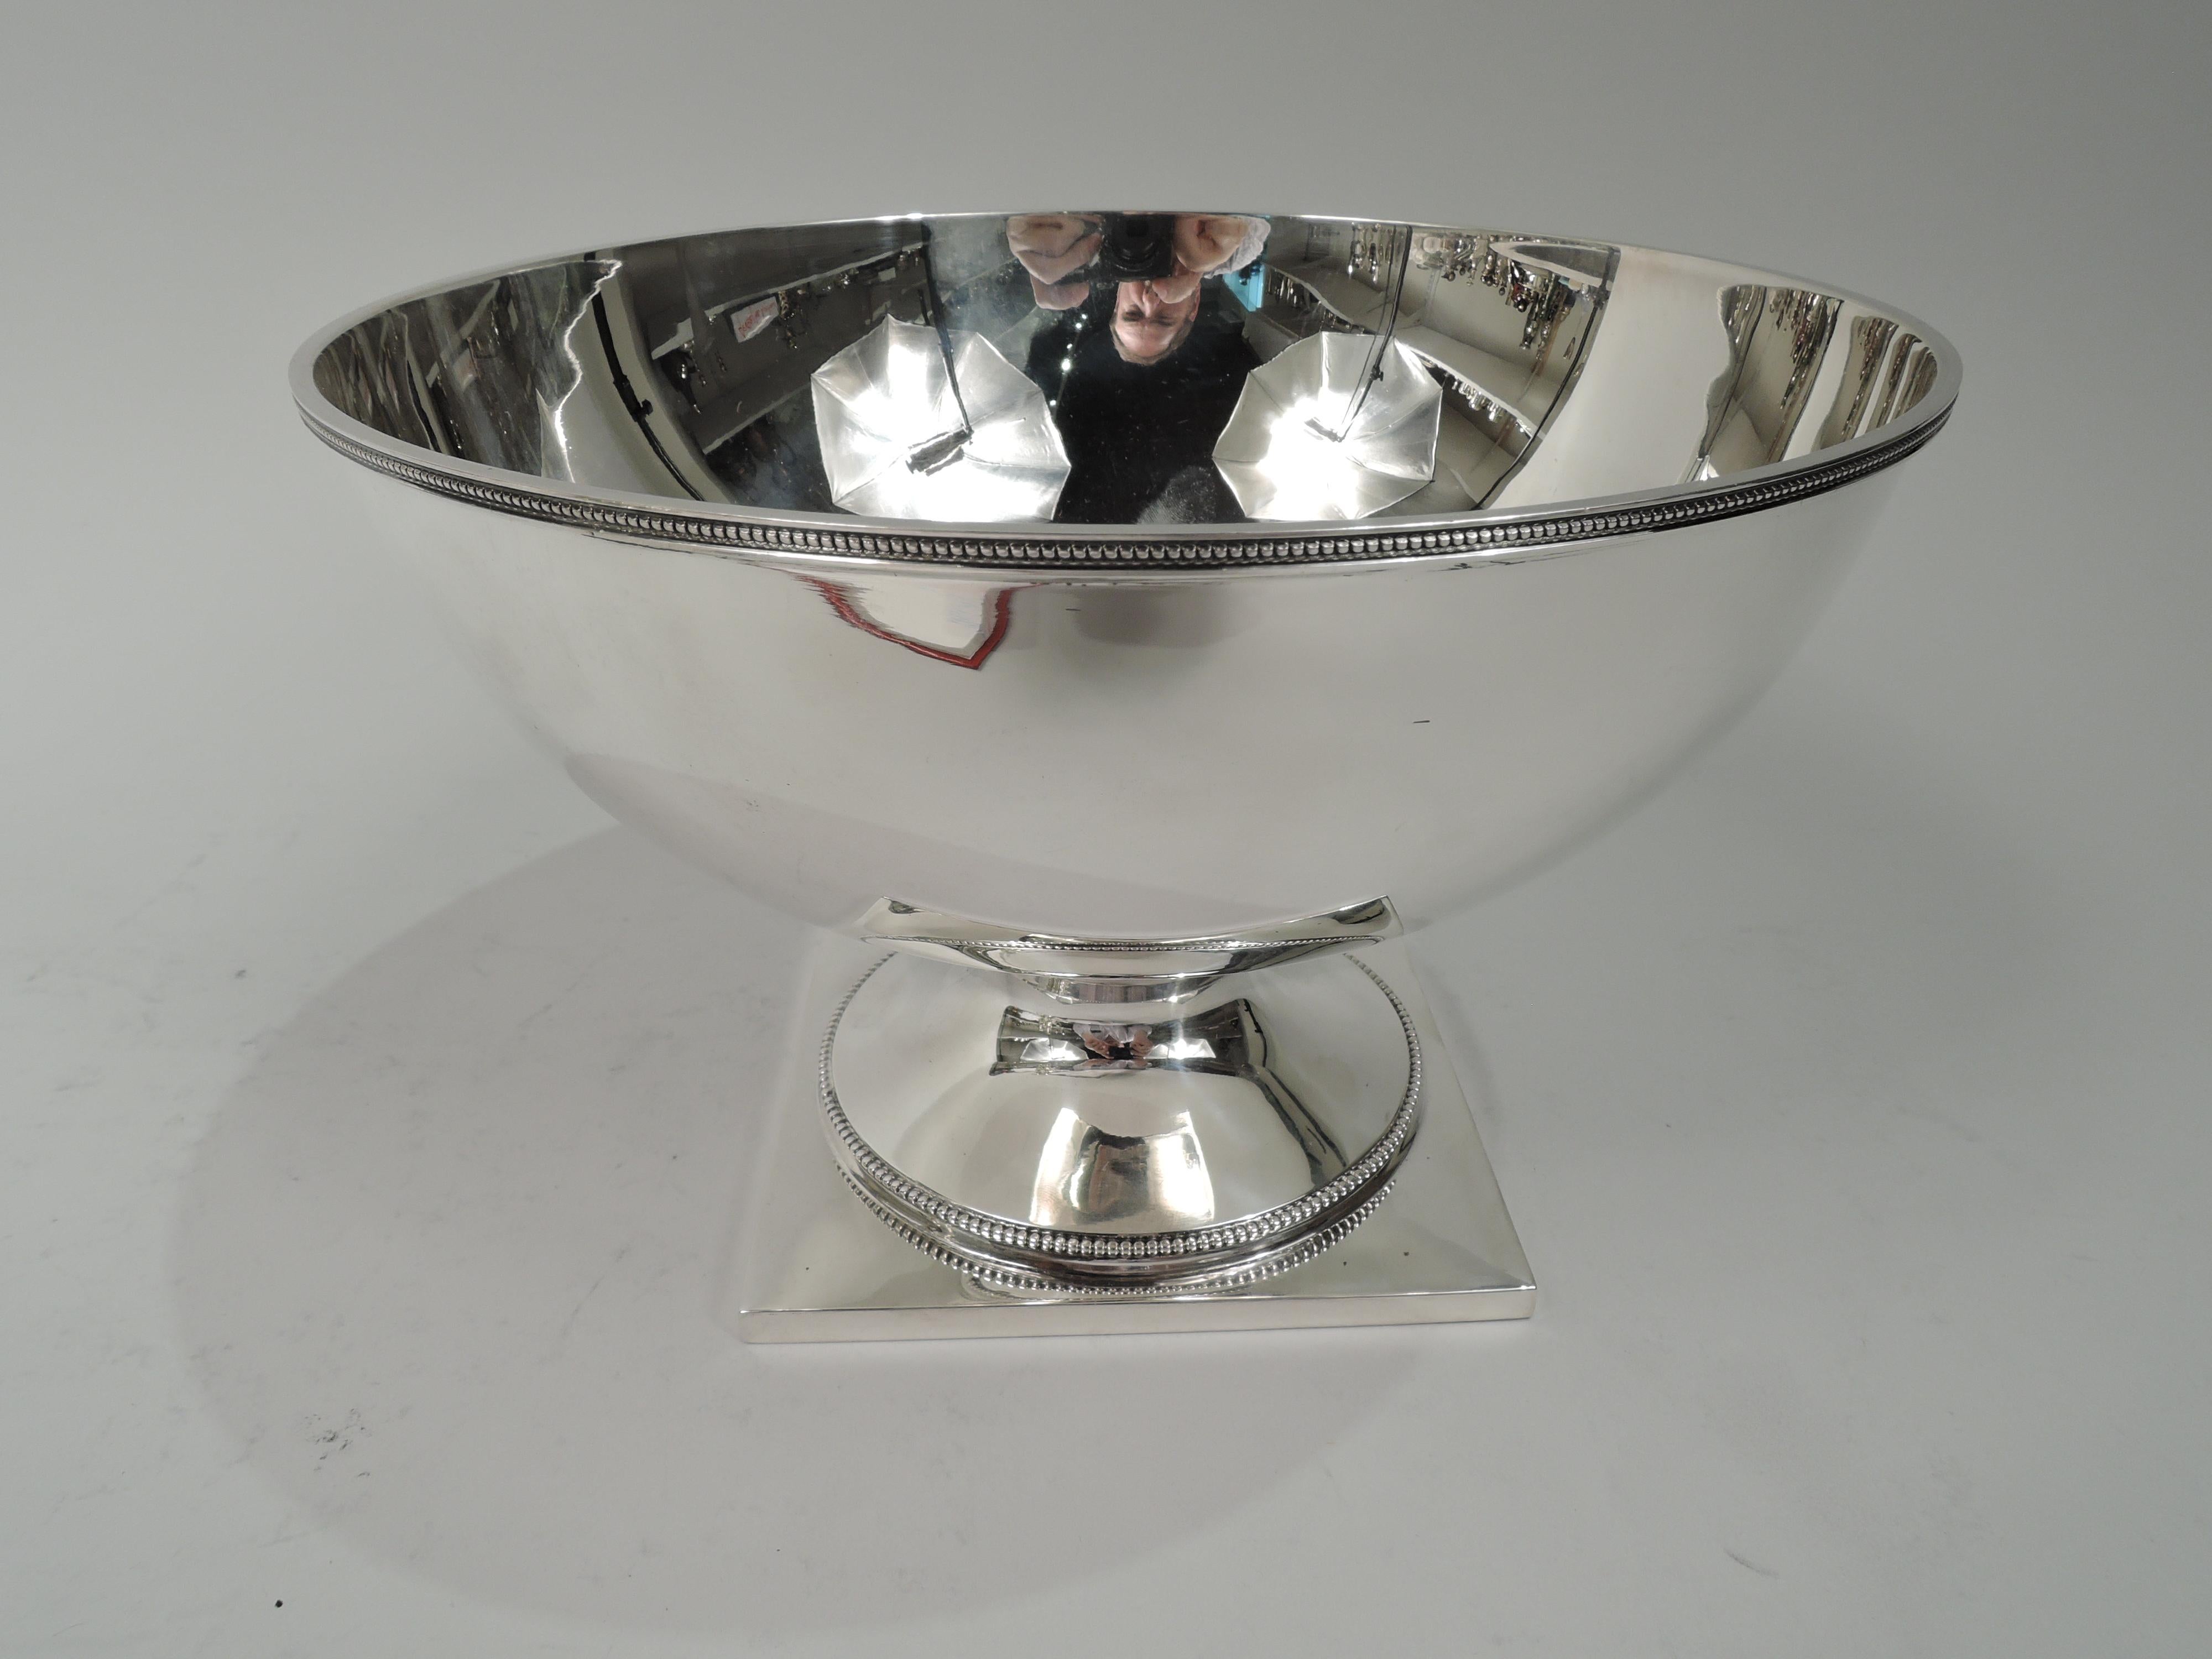 American Neoclassical sterling silver bowl. Retailed by Georg Jensen USA in New York. Curved sides and raised round foot mounted to square base. Beading. Fully marked including retailer’s stamp, no. 777, and phrase “Reproduction”. Weight: 20 troy